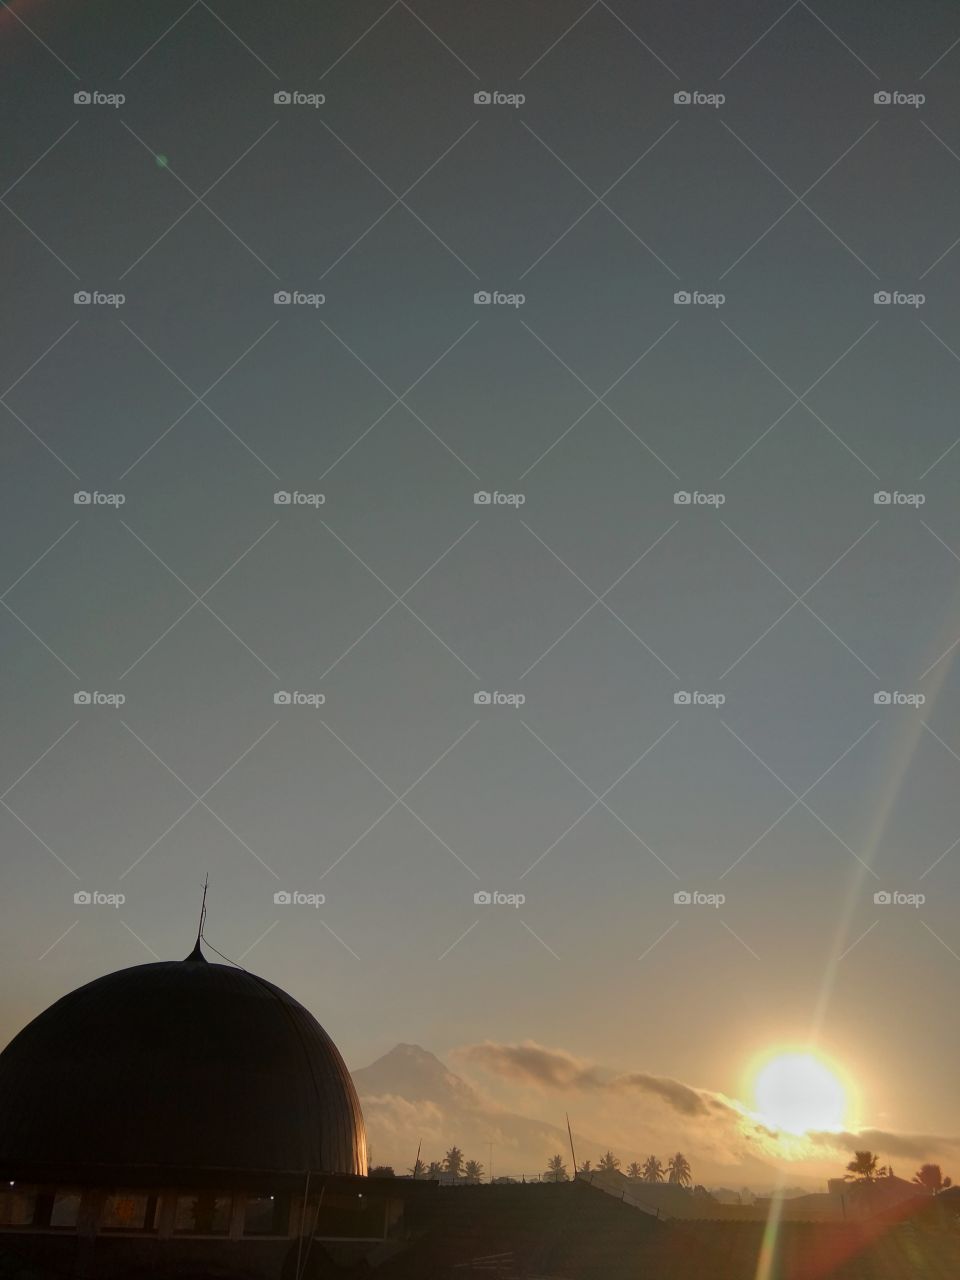 the view of the sun rising with the dome looks like a silhouette